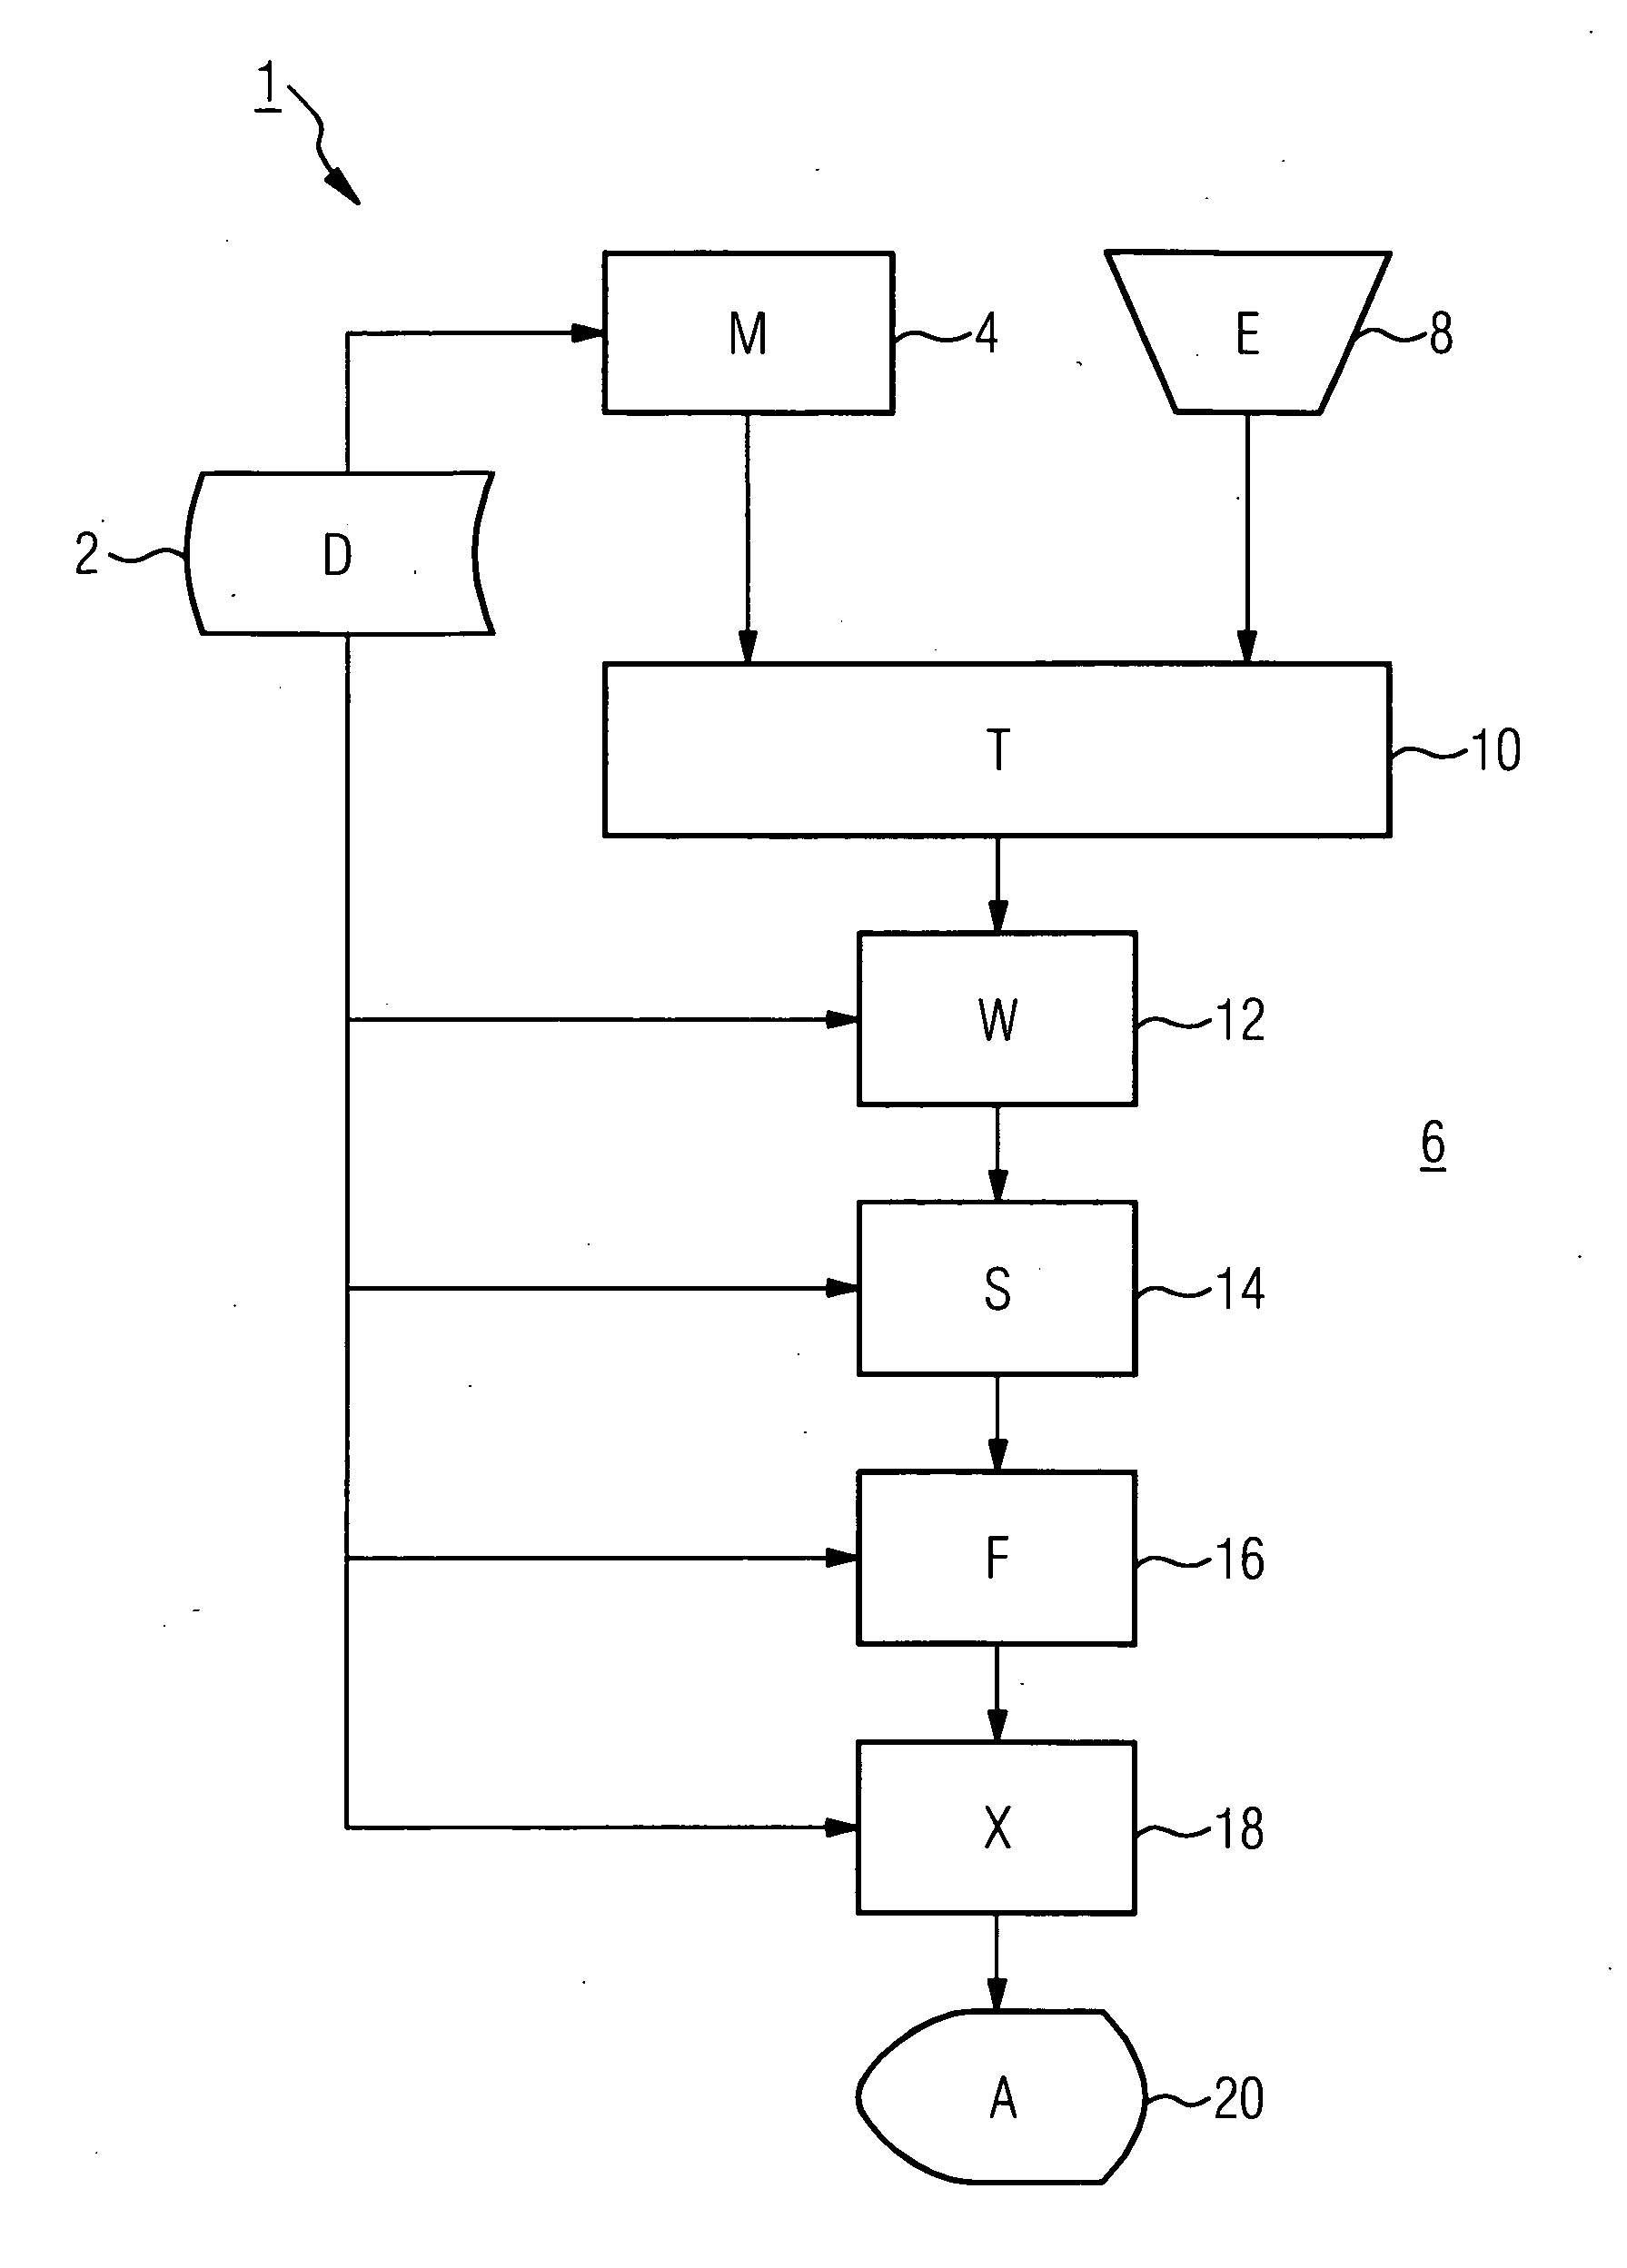 Method for operating an industrial scale installation and guidance system for same